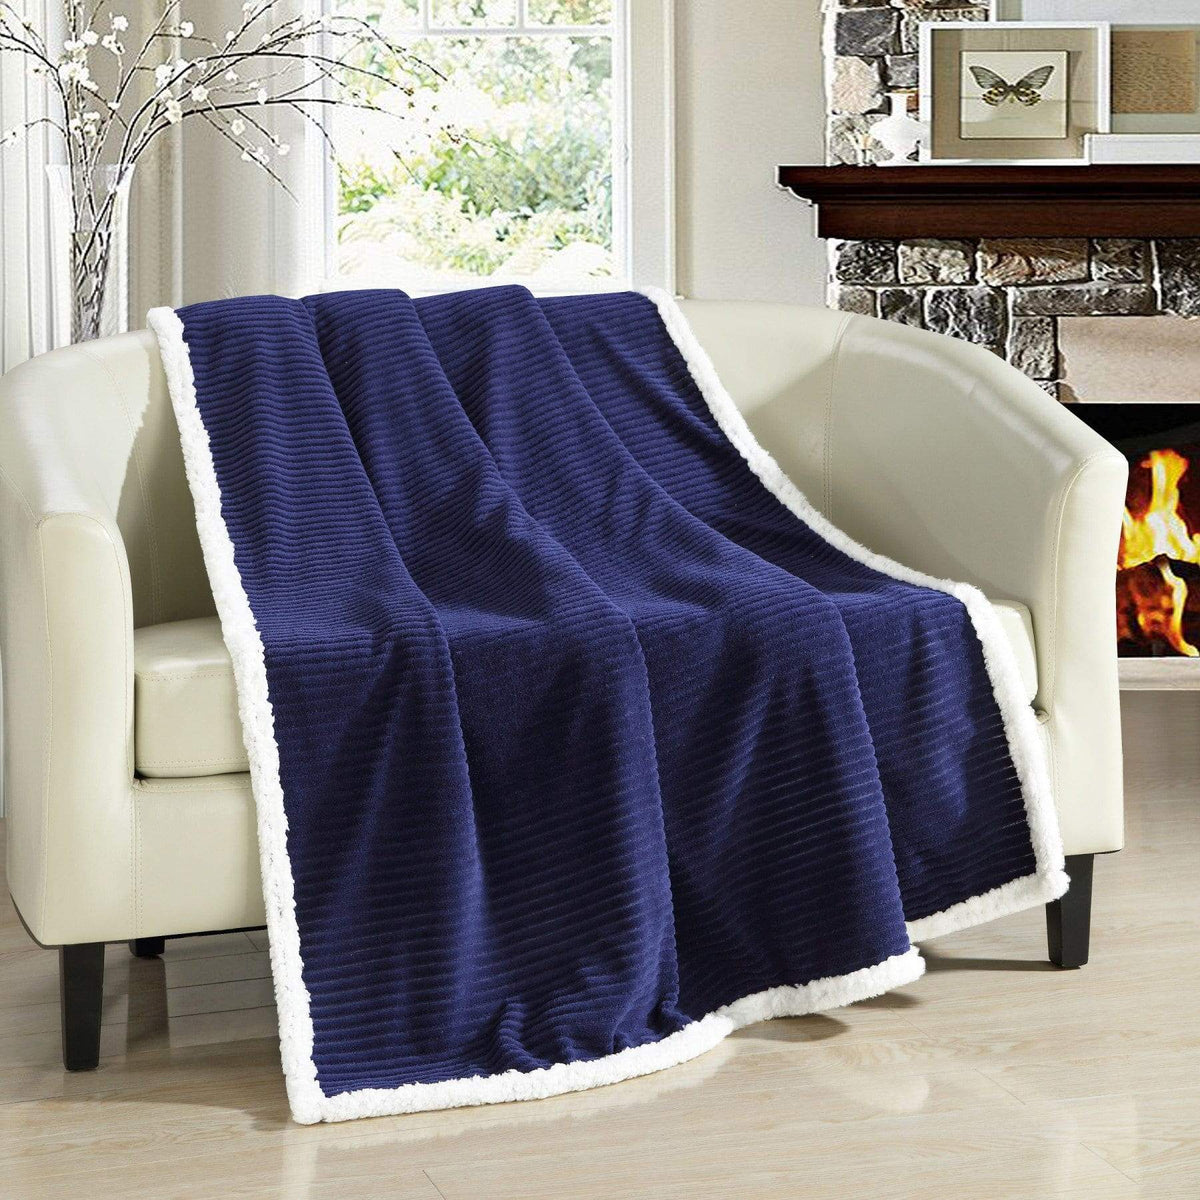 Chic Home Bern Micro Mink Sherpa Lined Throw Blanket Navy